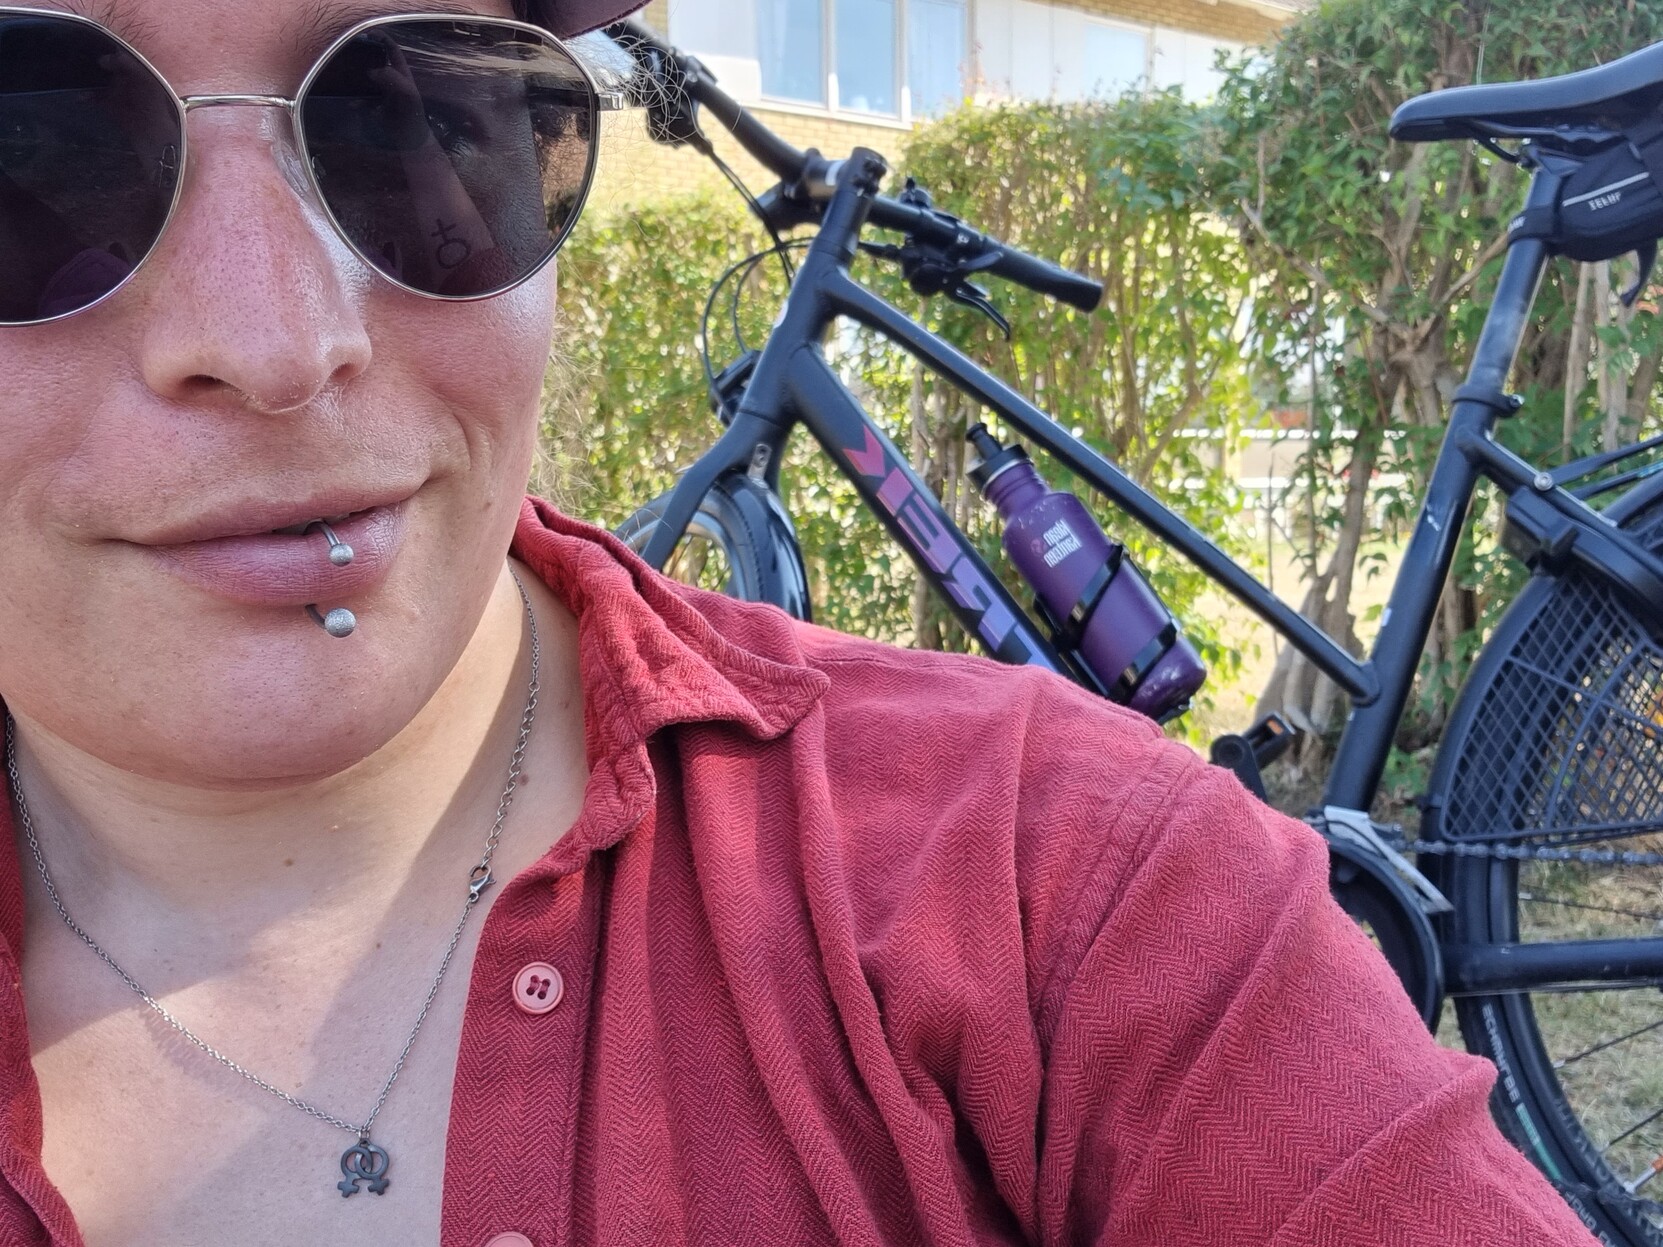 Me in front of my bike again. A non descript house is visible in the background.